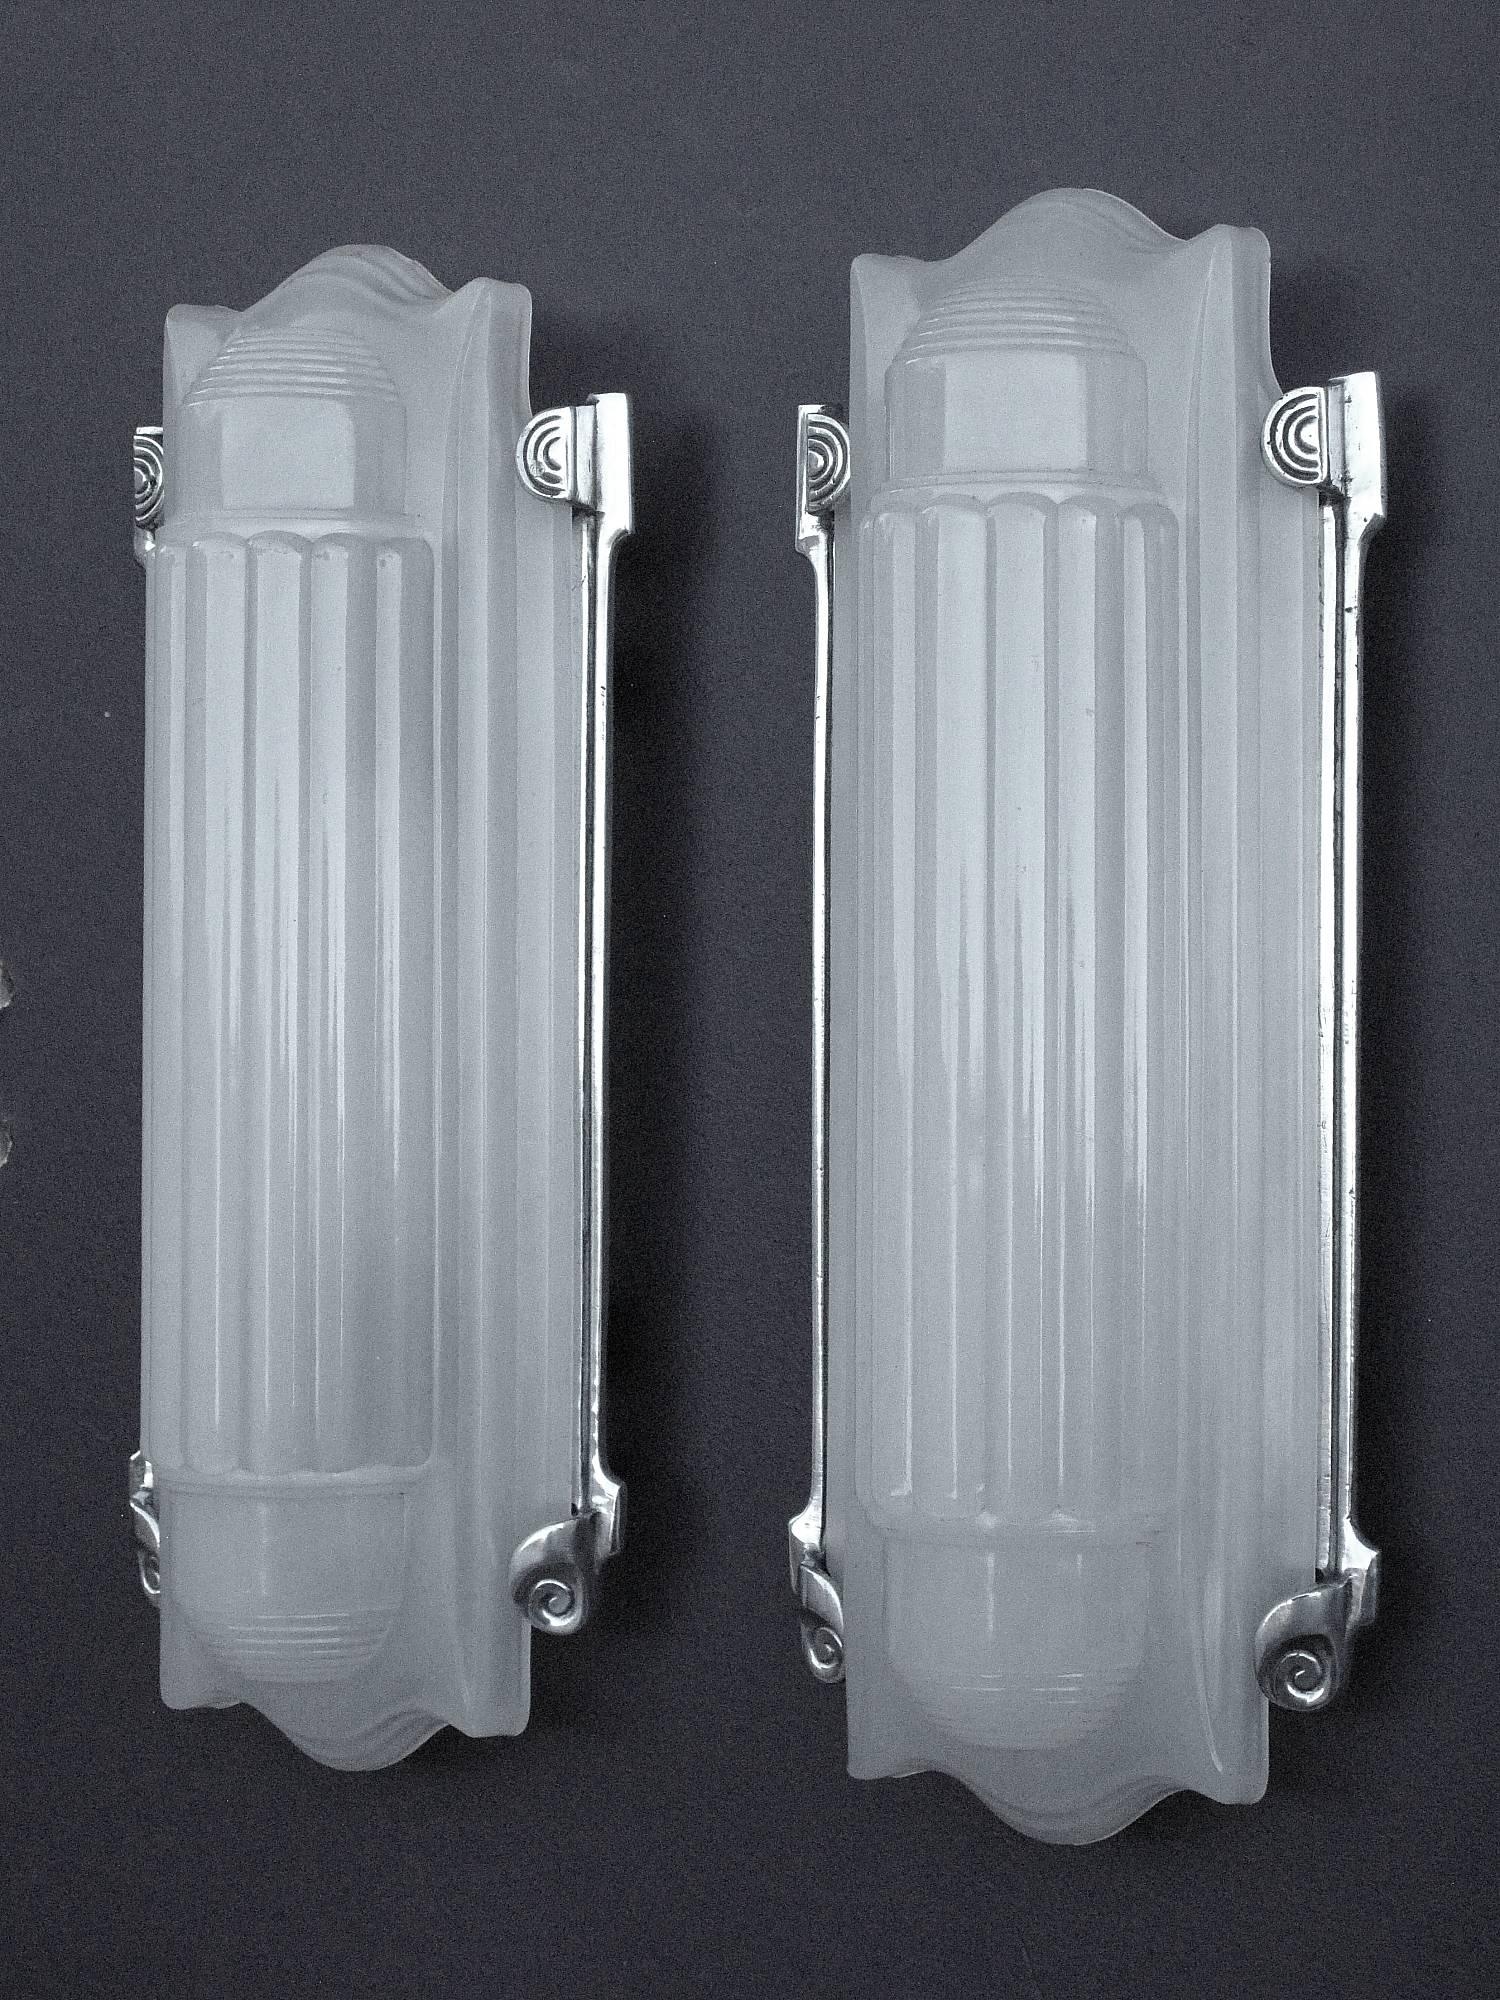 Total 3 available, 1 & 1/2 pair.  Single price 1/2 of pair.
What a great pair of vintage 1920s-1930s Art Deco wall fixtures. Minimal yet refined, elegant, and very serious. Mini skyscrapers for your wall. The opaque glass shades nest quietly into